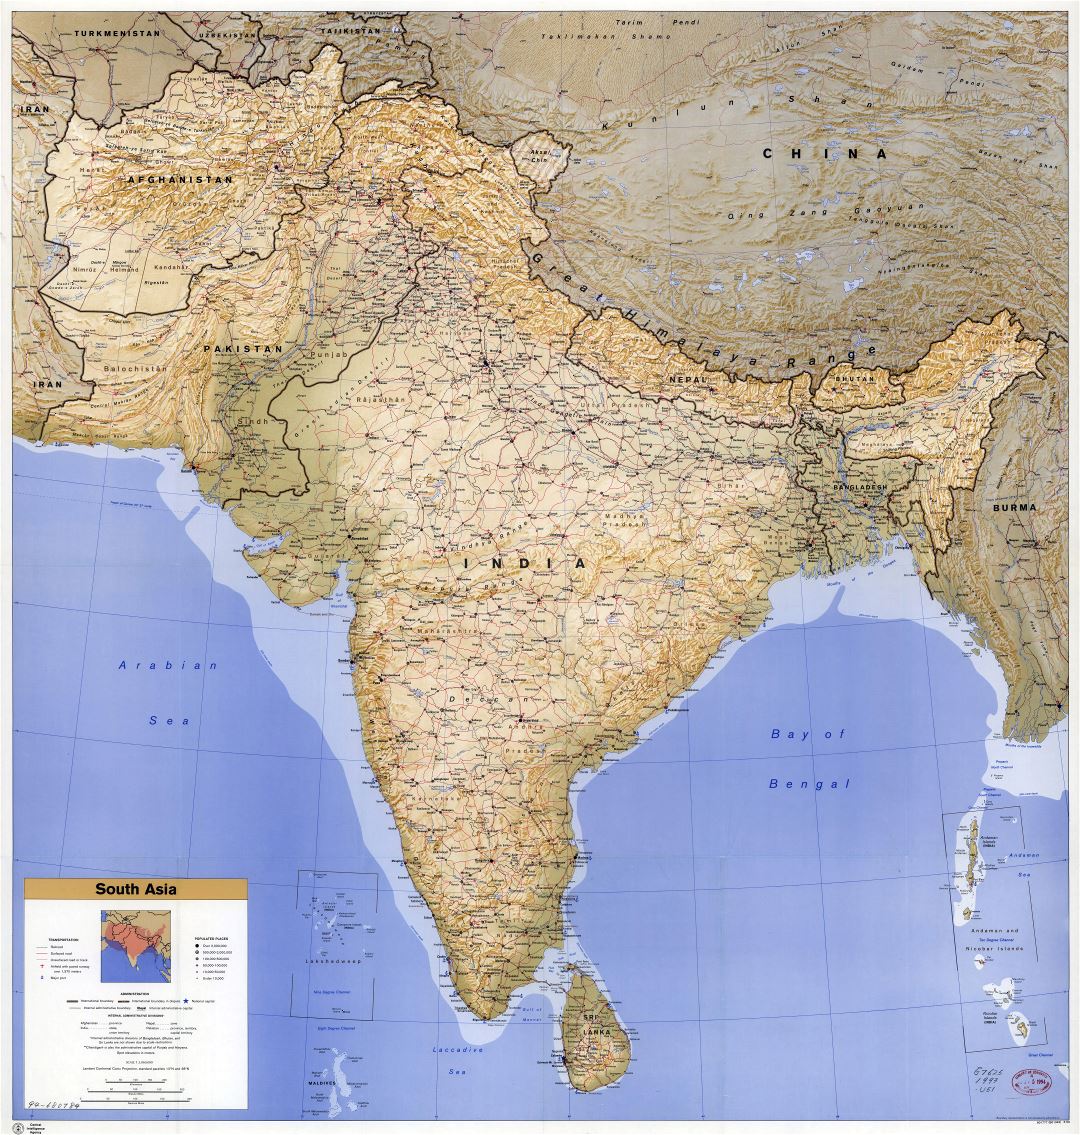 Large scale detailed political map of South Asia with relief, roads, railroads, cities, airports and seaports - 1993